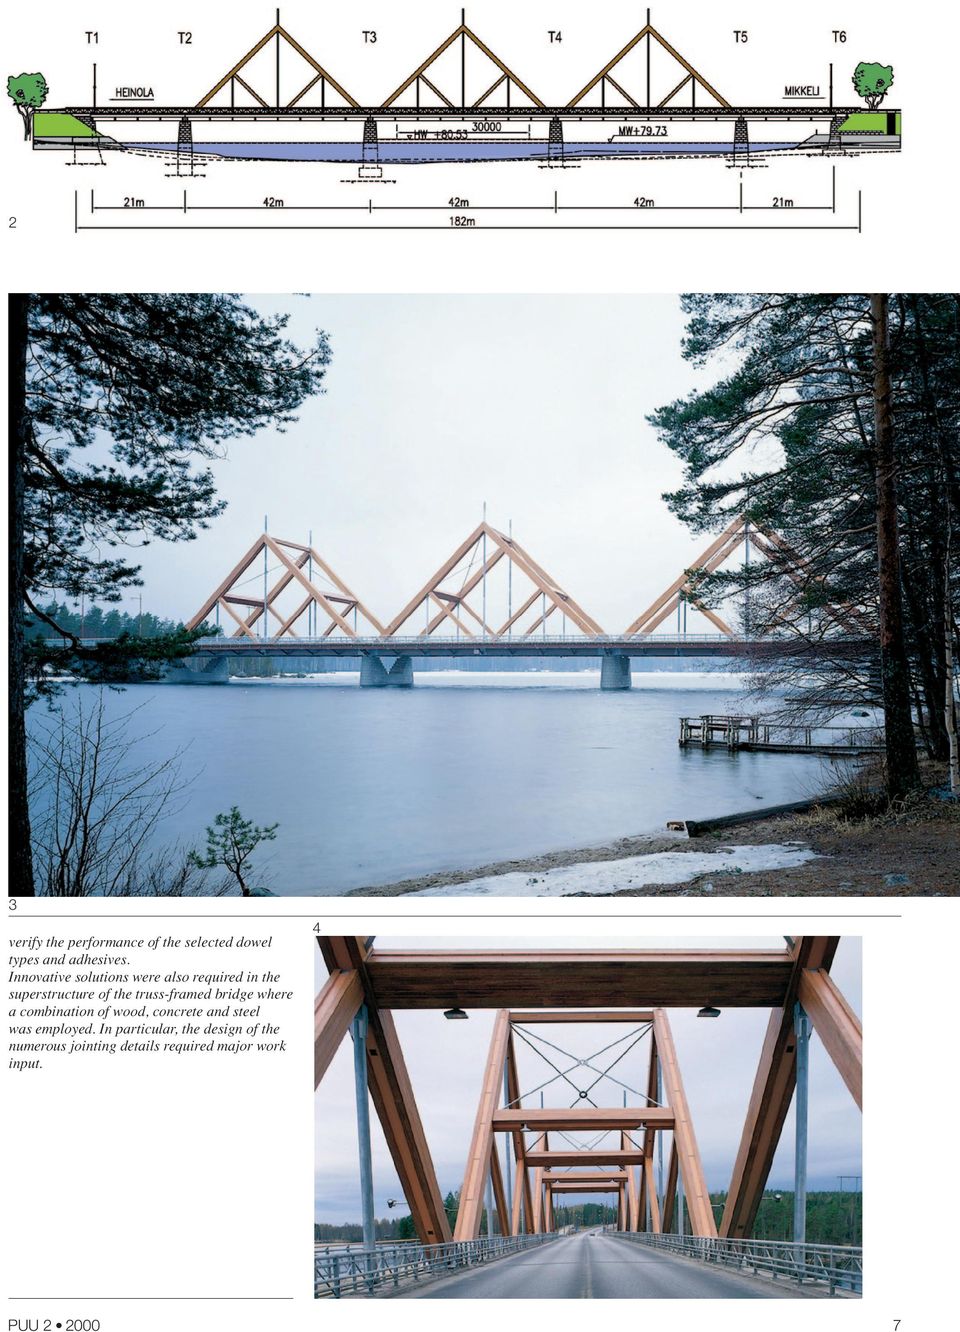 truss-framed bridge where a combination of wood, concrete and steel was